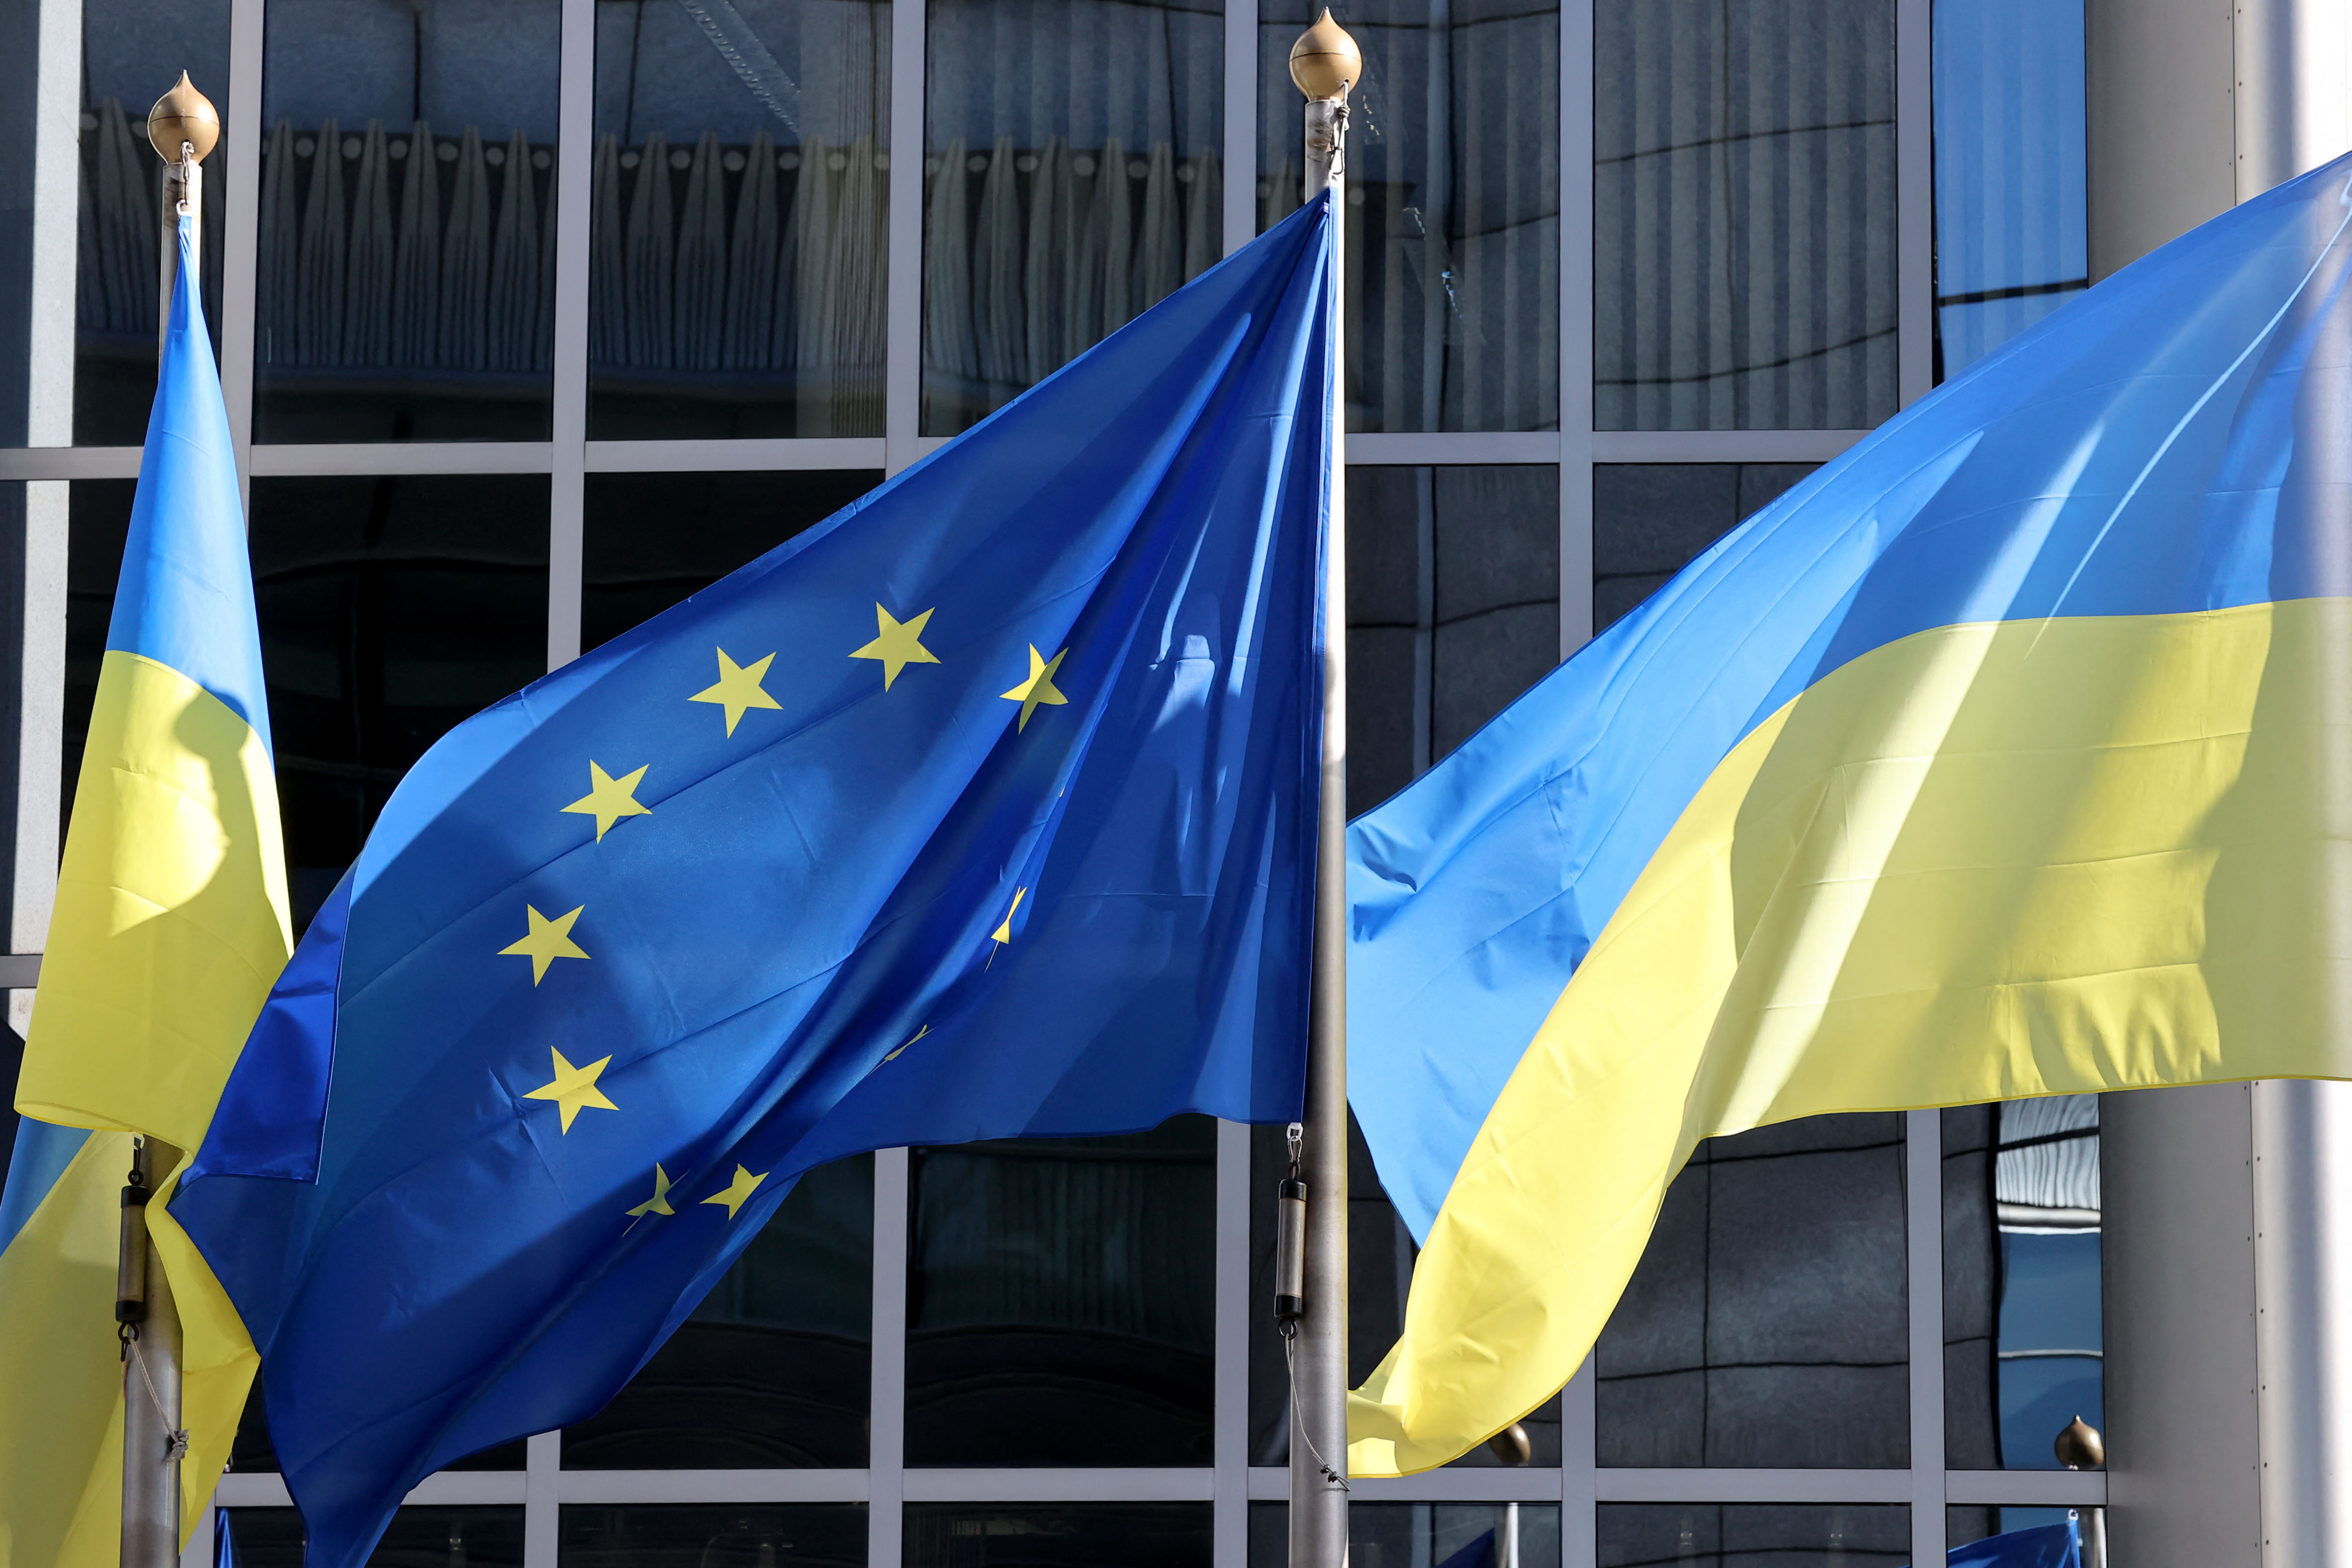 The Ukrainian flag flutters along side the European Union flag outside the European Parliament headquarters to show their support for Ukrania after the nation was invaded on February 24 by Russia, in Brussels on February 28, 2022. (Photo by François WALSCHAERTS / AFP) (Photo by FRANCOIS WALSCHAERTS/AFP via Getty Images)